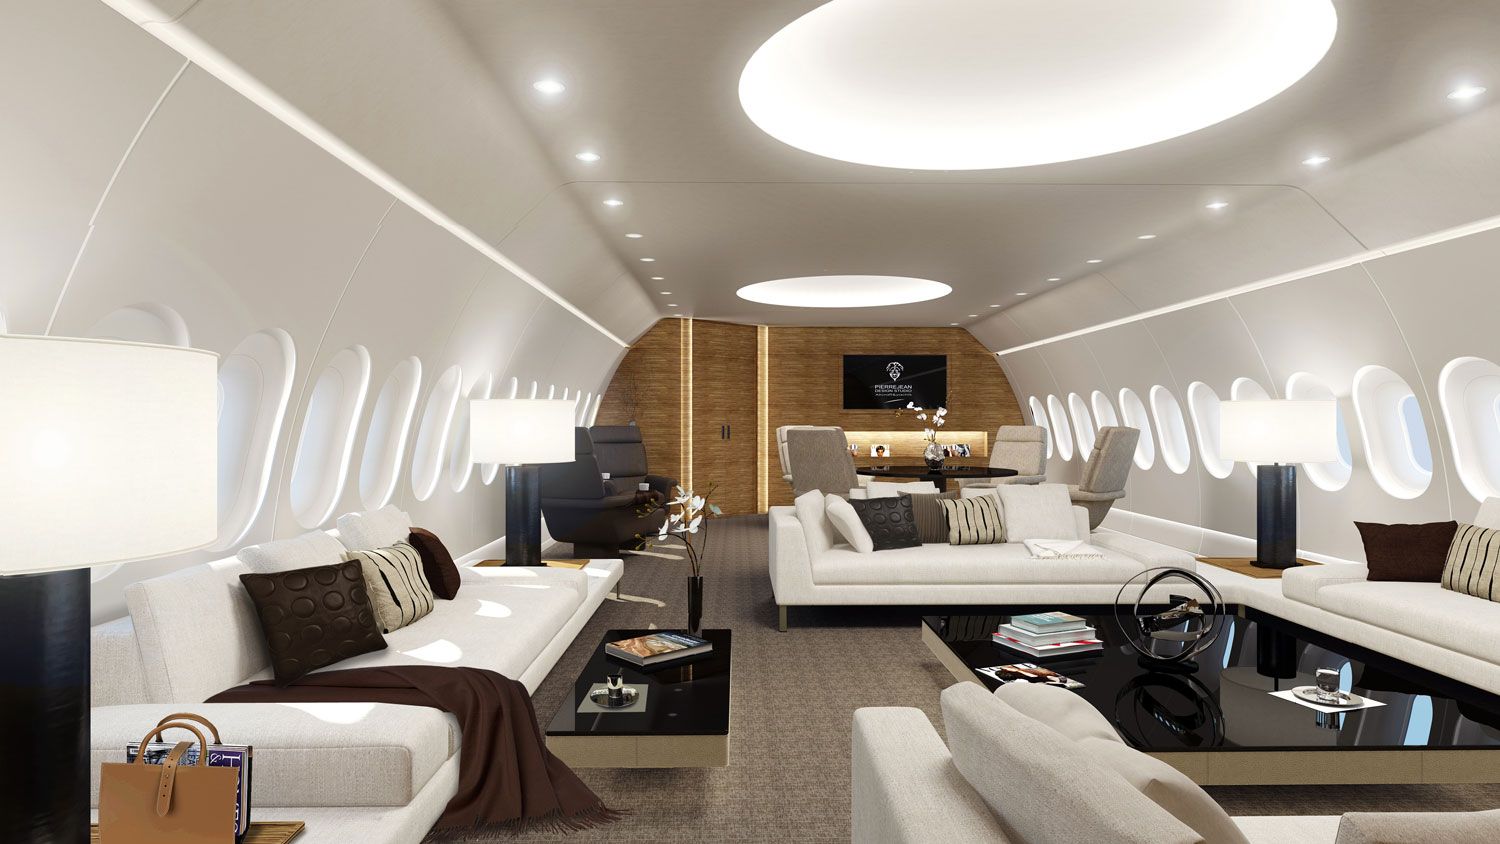 Inside the lounge area of a Boeing 787 BBJ.